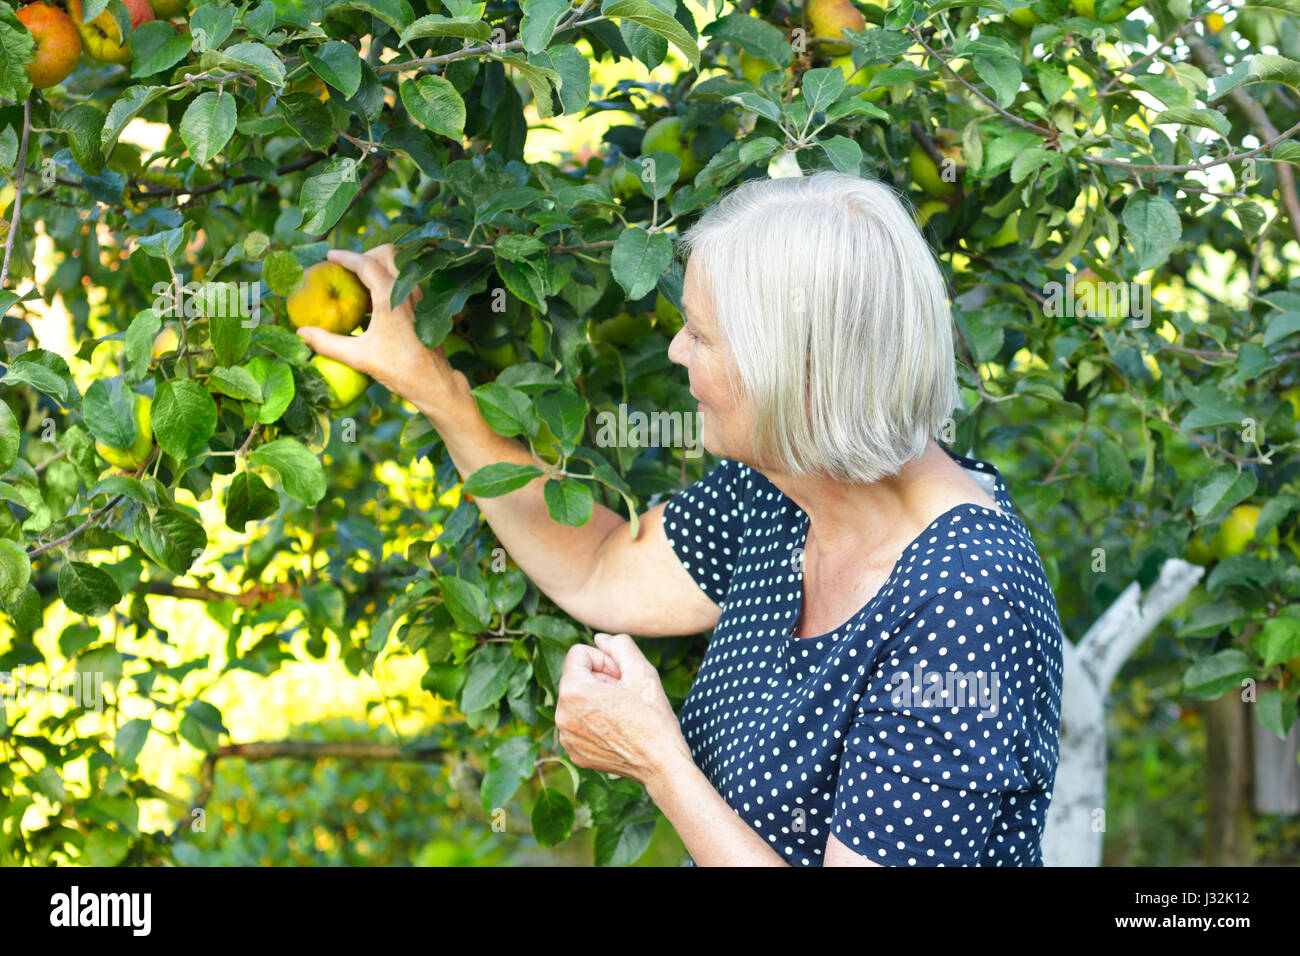 Older woman in a blue polka-dotted dress and a basket on her arm picking ripe apples of a tree in her garden yard, active and healthy retirement conce Stock Photo